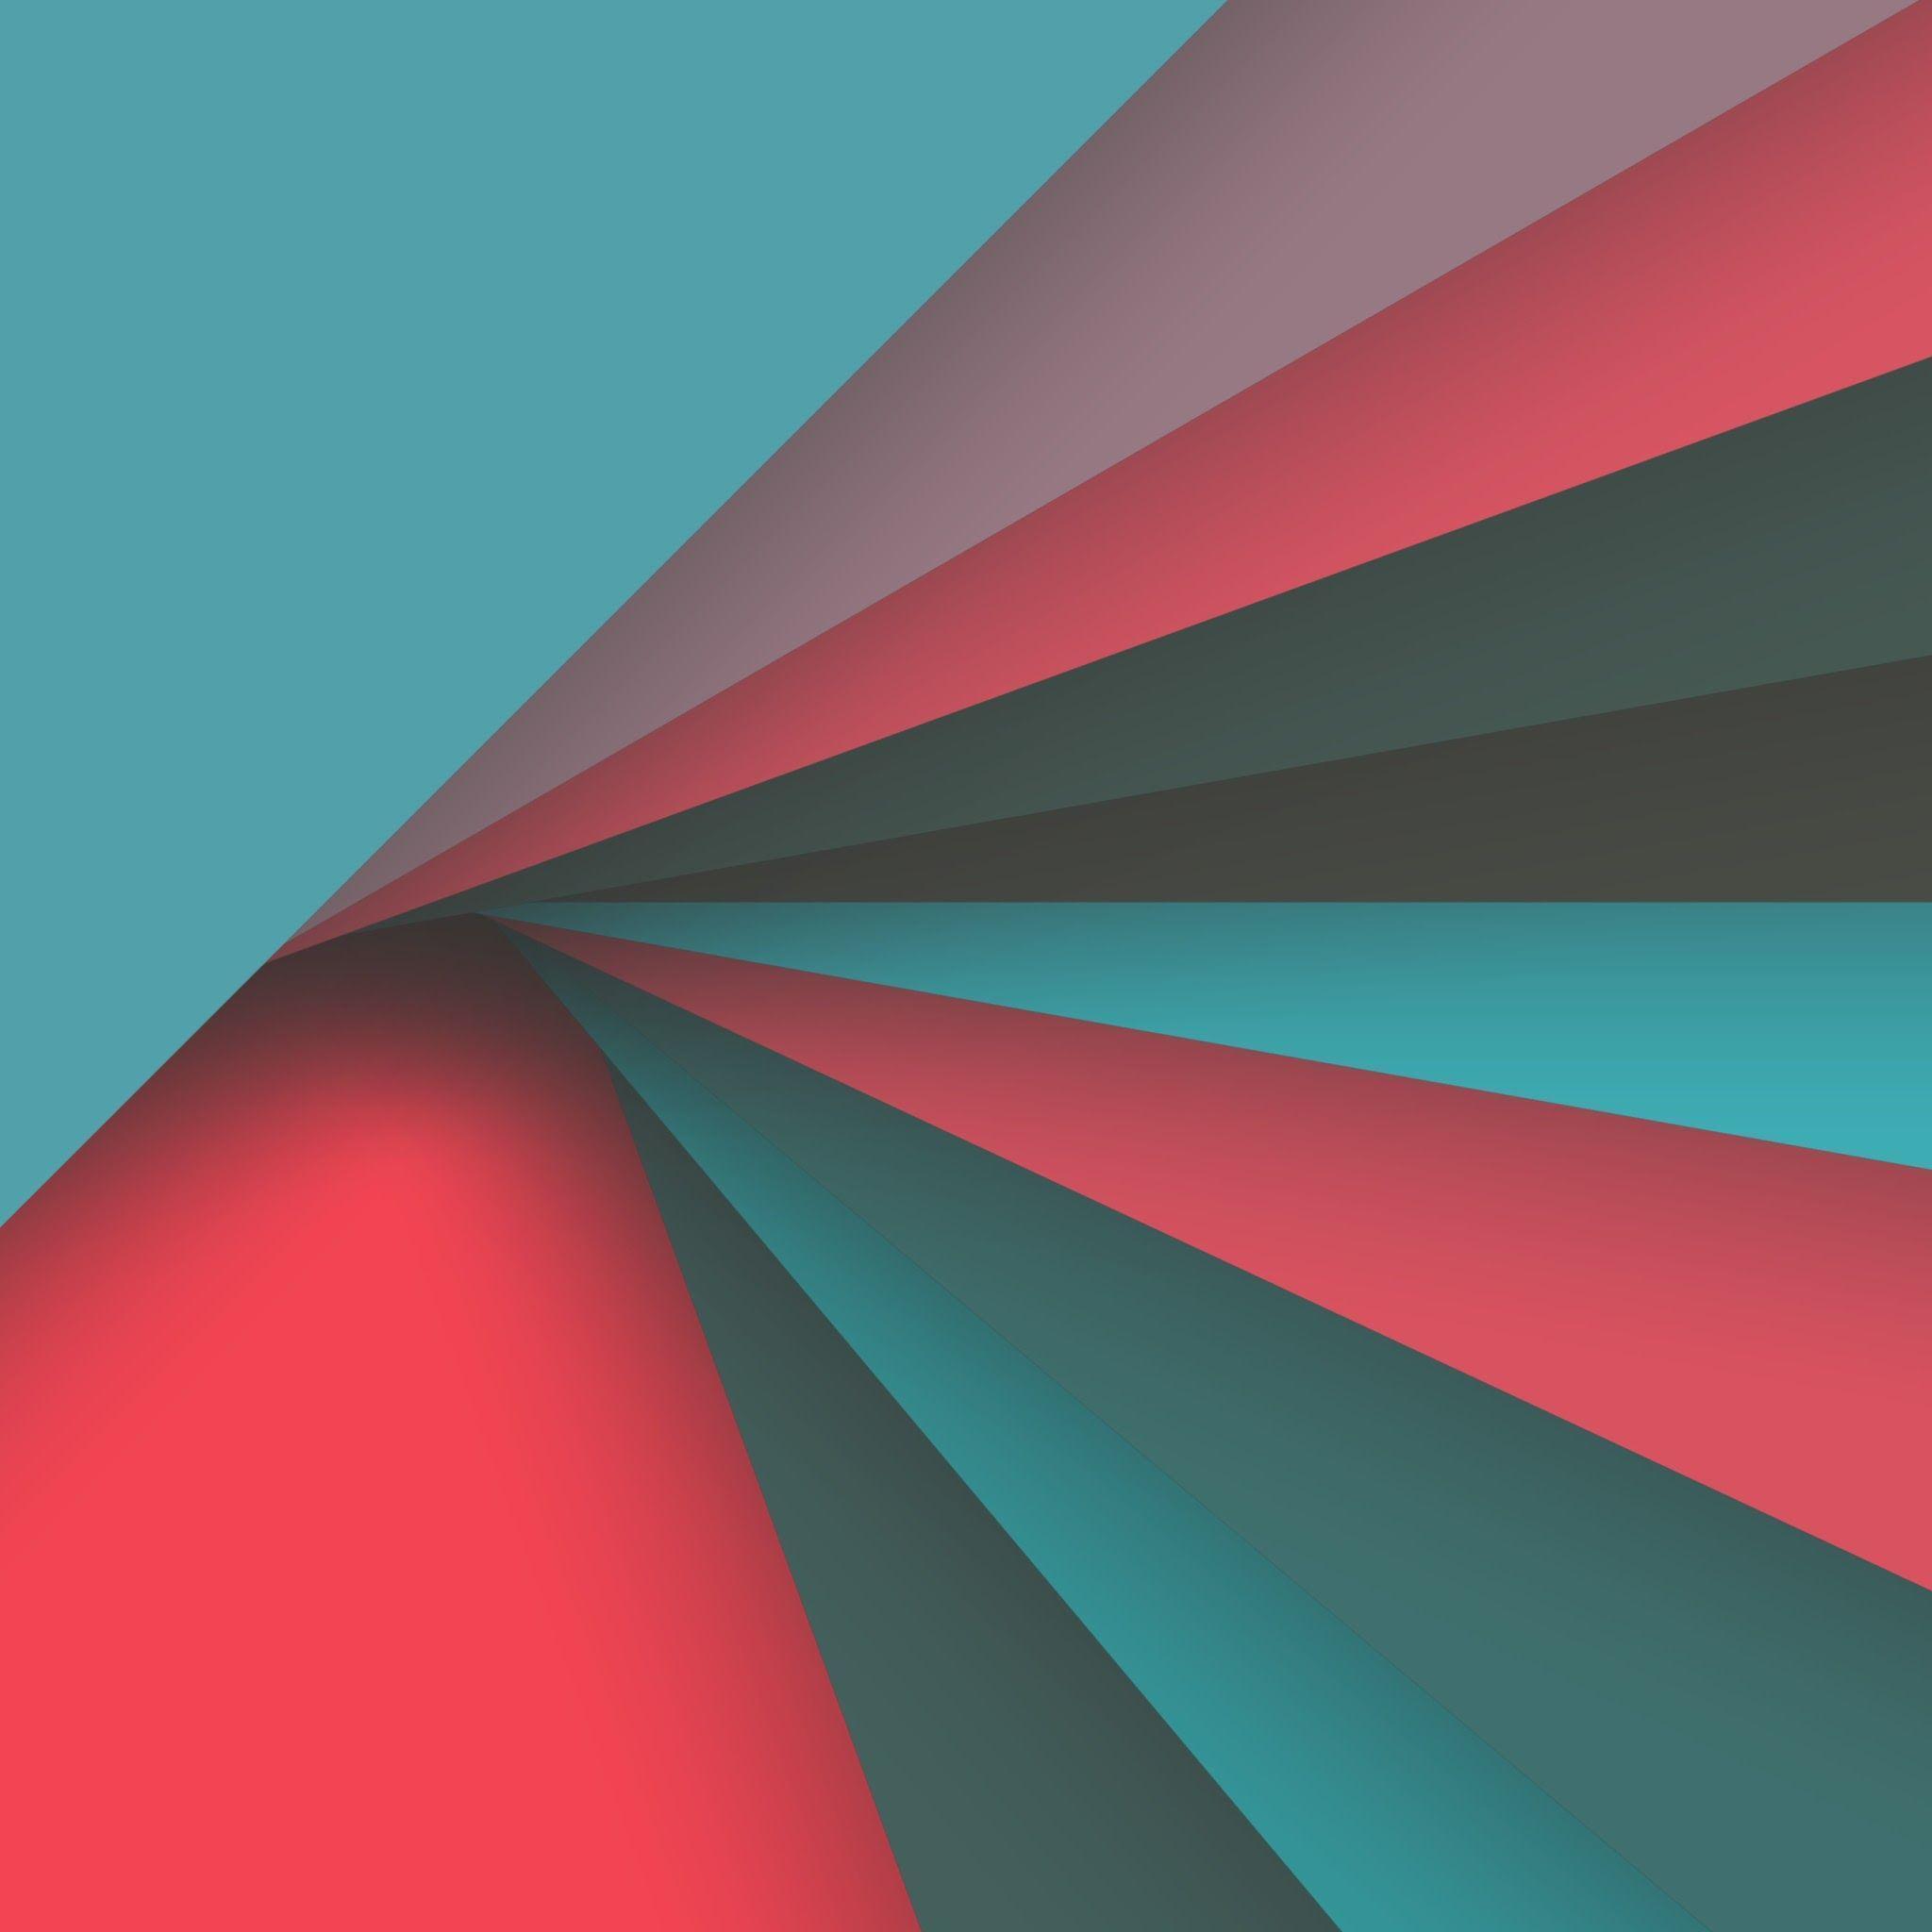 Ultimate Material Design inspired wallpaper collection